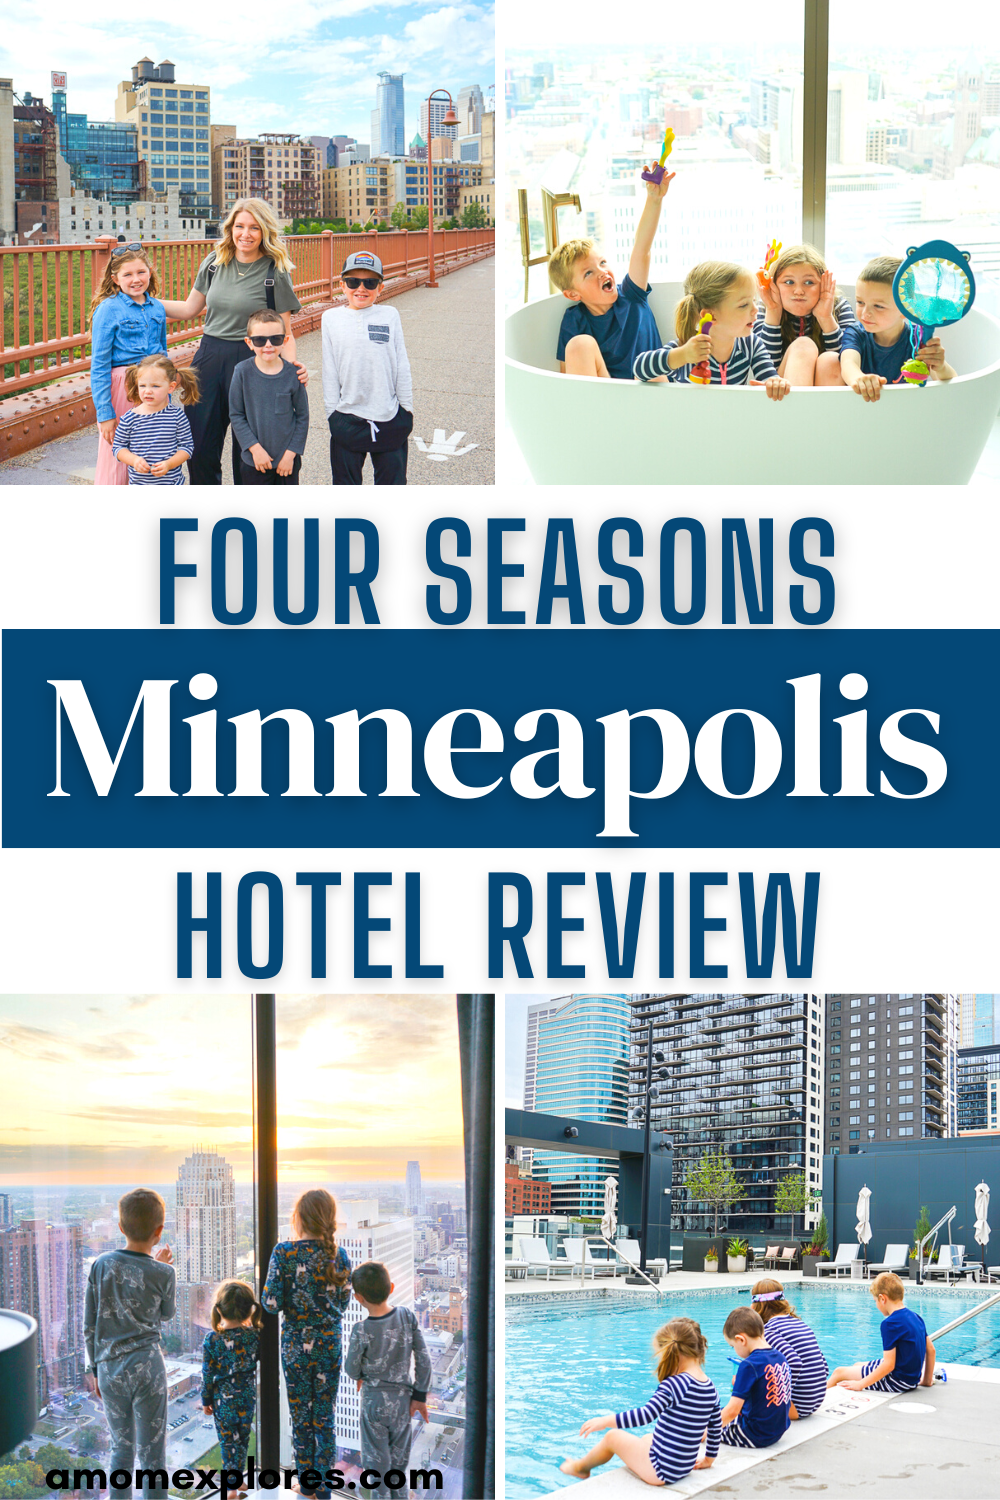 FOUR SEASONS MINNEAPOLIS HOTEL REVIEW.png